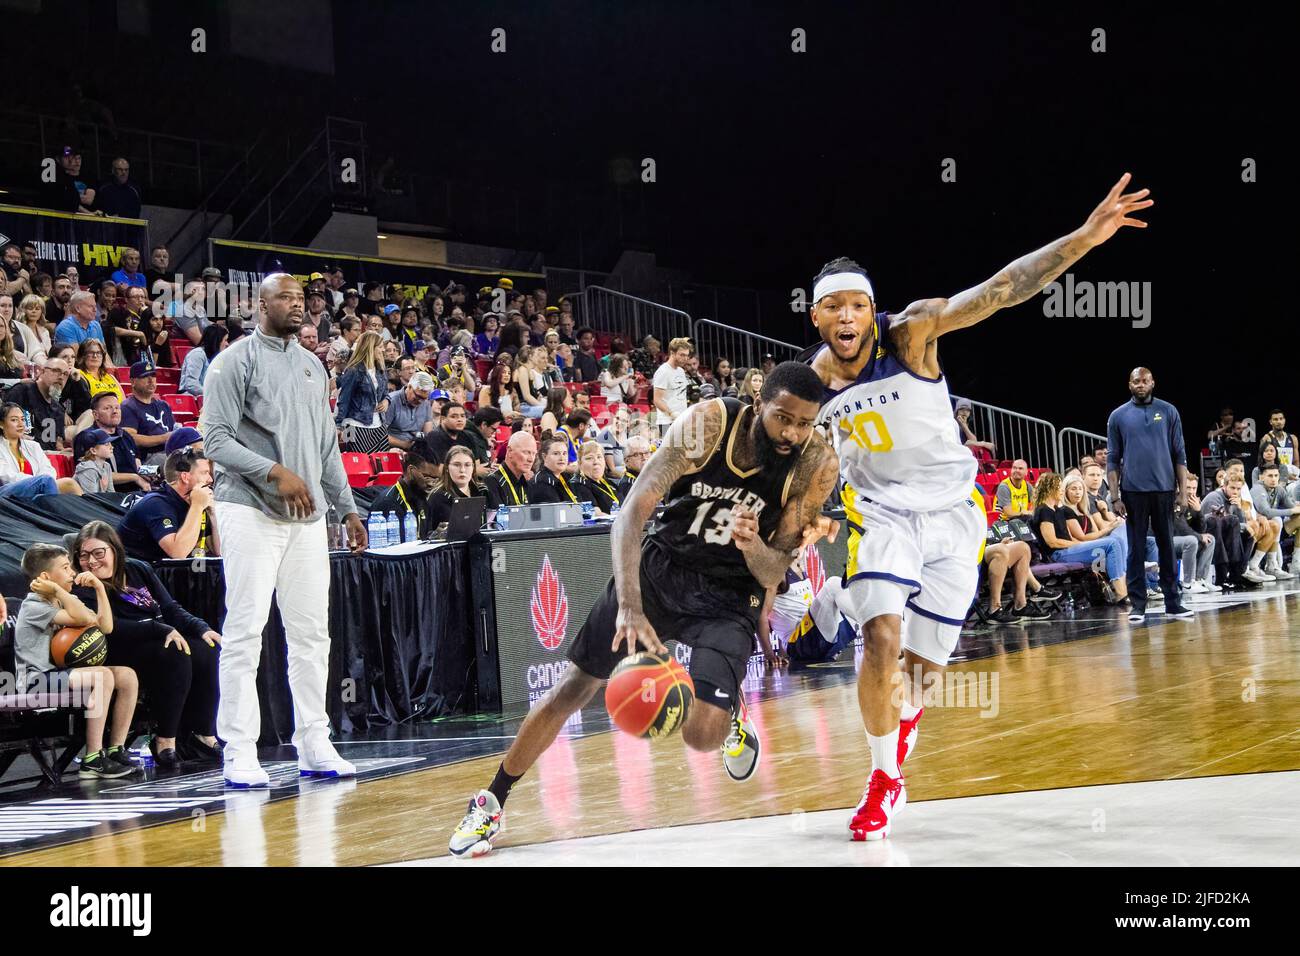 Edmonton's #10 Mathieu Kamba (guard) defends against Newfoundland's #13 Terry Thomas (Guard) during the Edmonton Stingers rout of the Newfoundland Growlers in Canadian Elite Basketball Action with a historic victory. Edmonton Stingers 120-69  Fraser Valley Bandits. Stock Photo